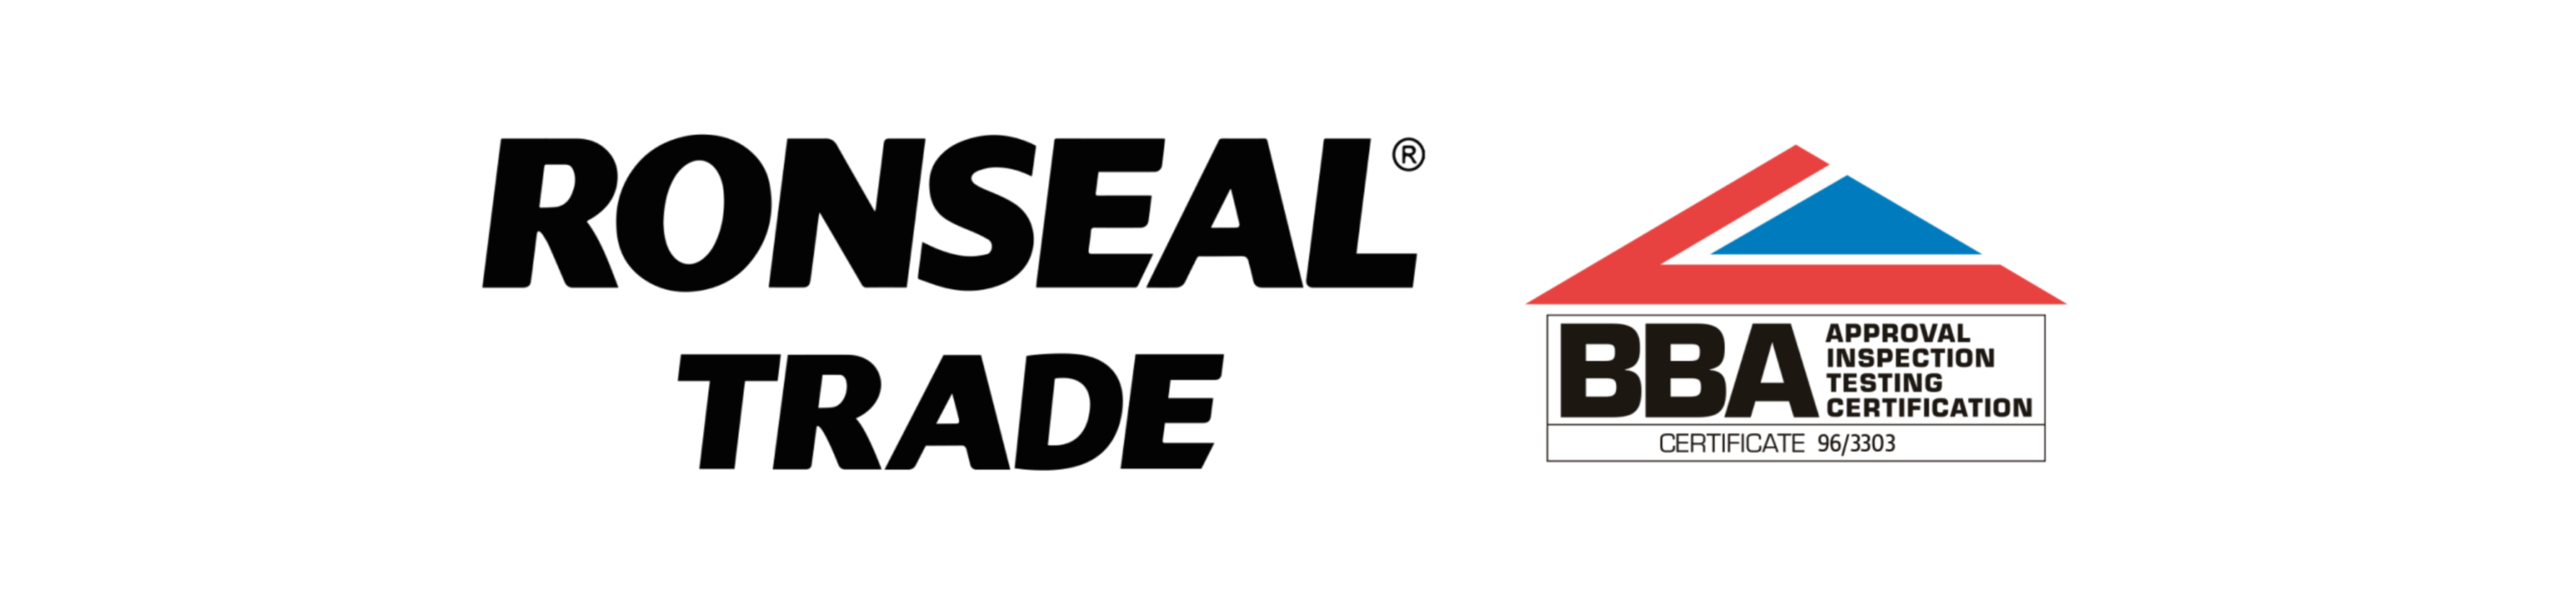 Ronseal Trade BBA Certification